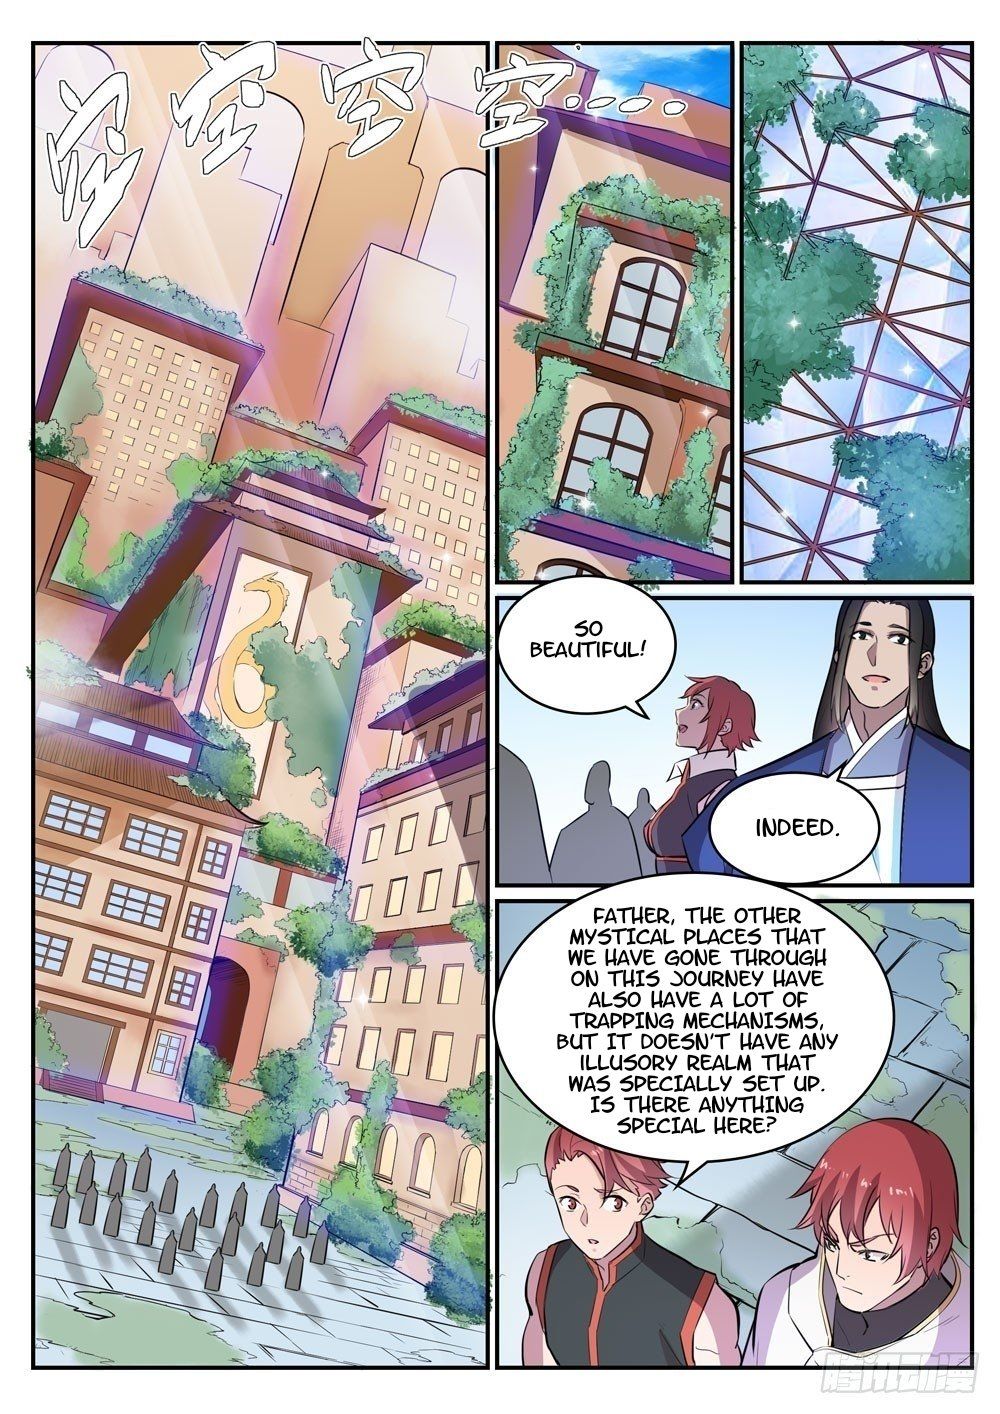 Apotheosis Chapter 444 - Page 4